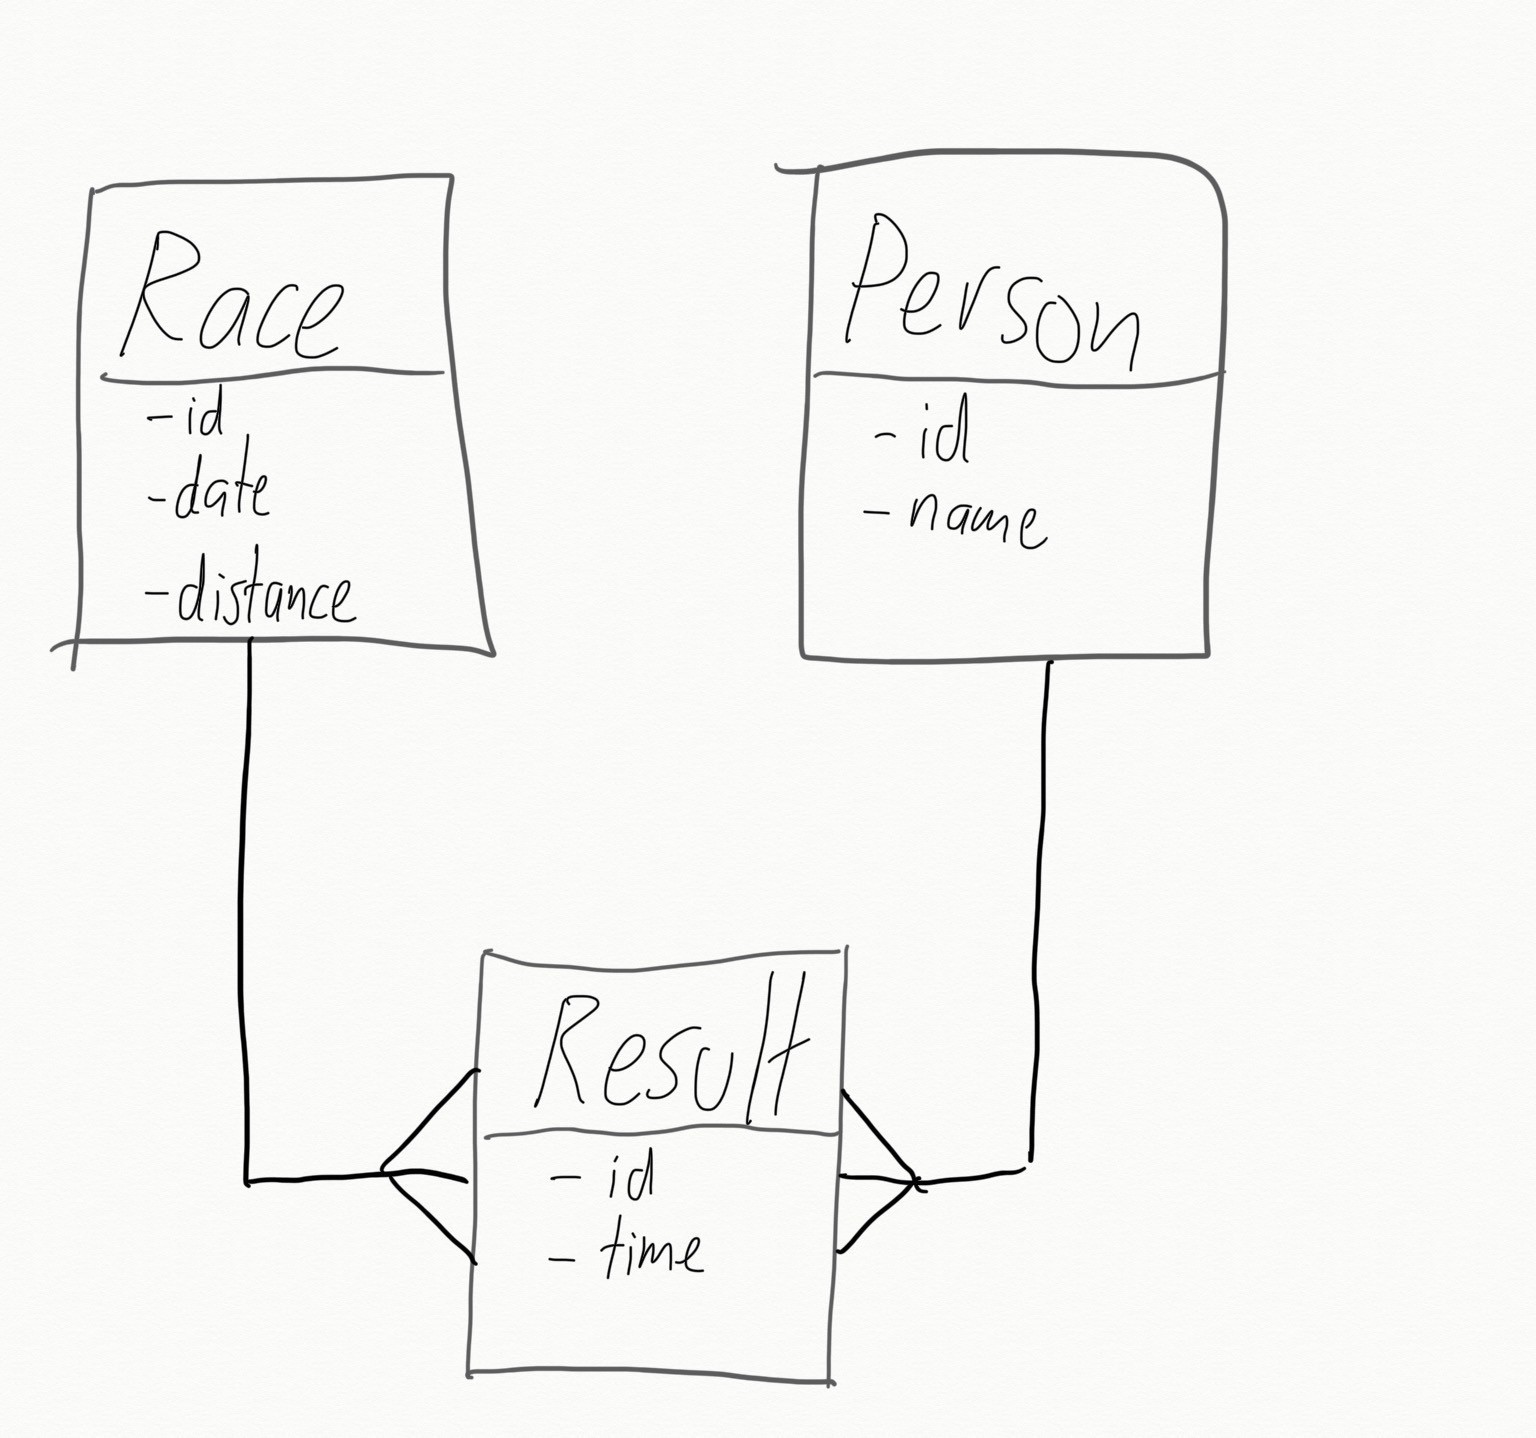 Data model showing a one to many relationship from Race to Result and from Person to Result